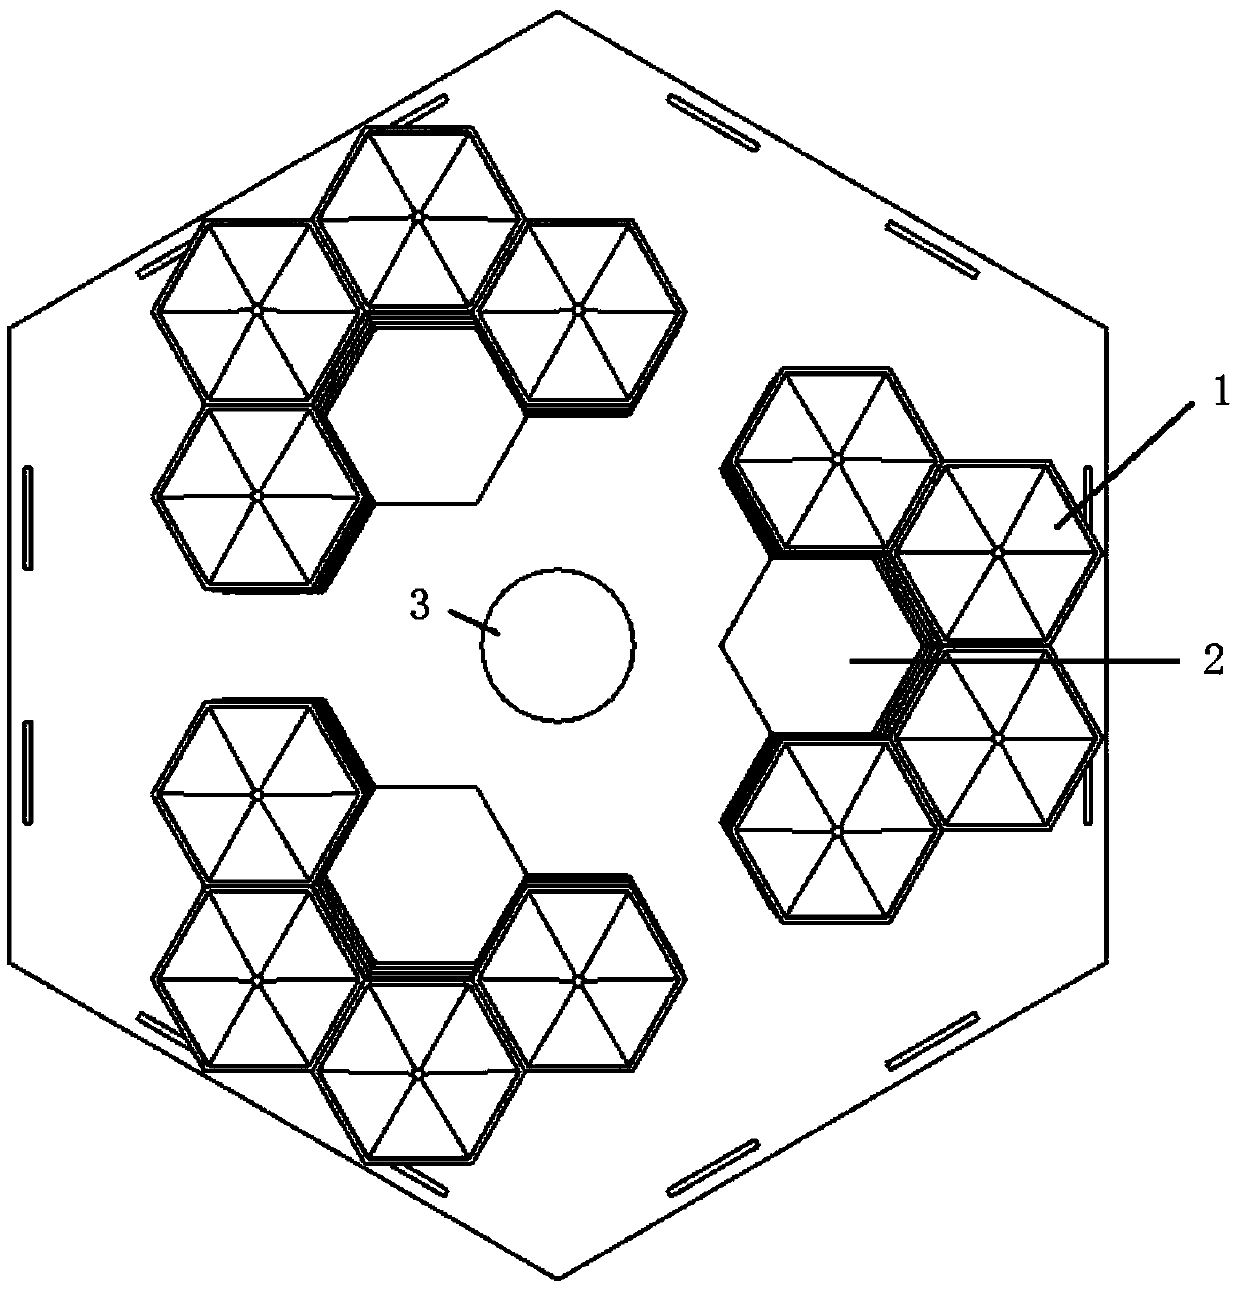 Hexagonal building group system with rain collecting and greening functions